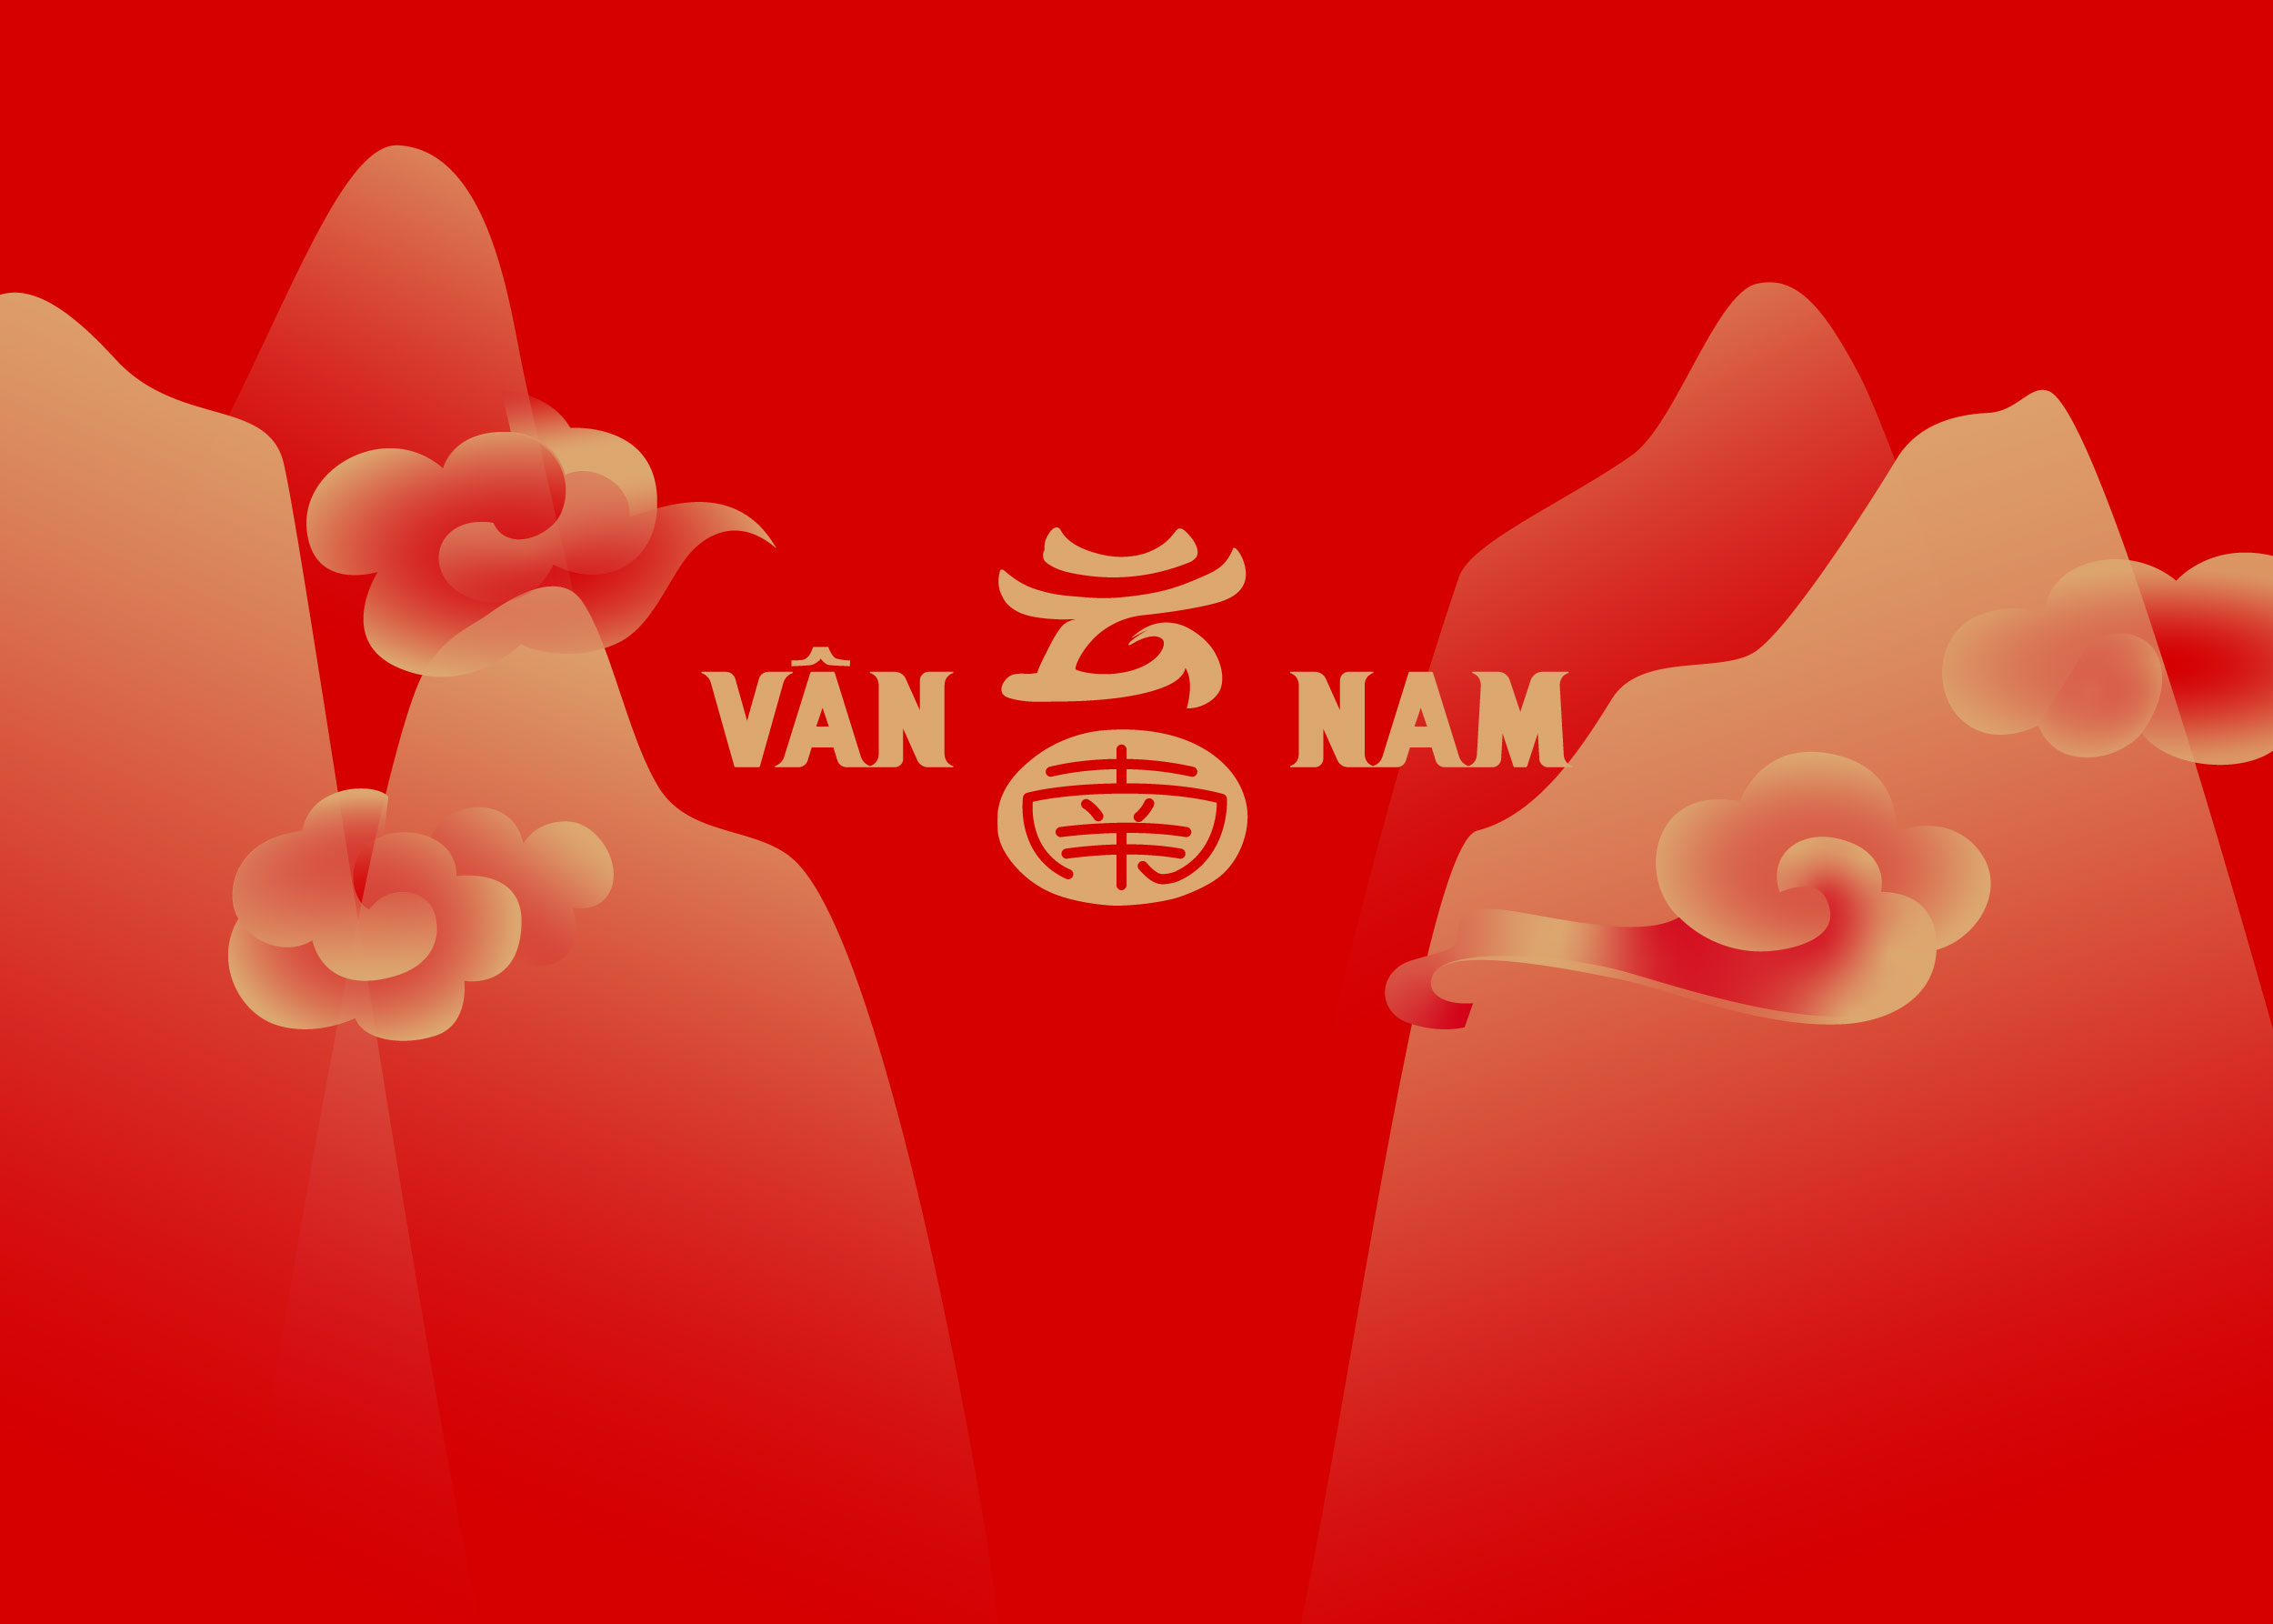 Van Nam Designed By Cillgold: A Chinese Teahouse in the Heart of Saigon